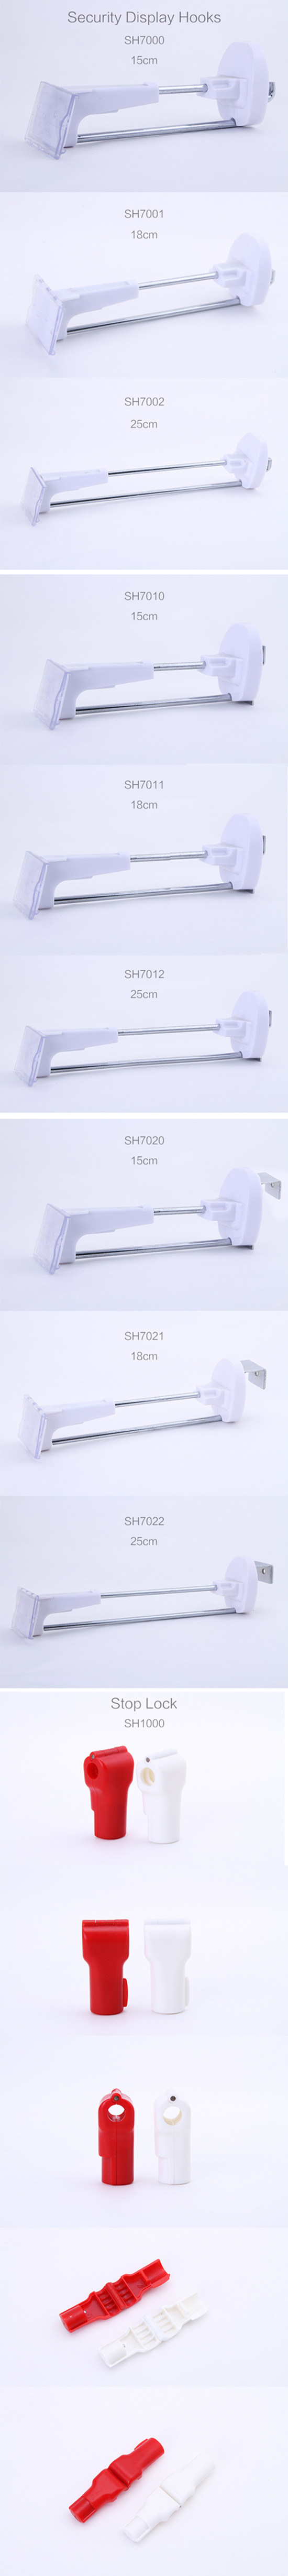 Retail Security Display, Plastic Security Slatwall Locking Display Hook for Retail Store